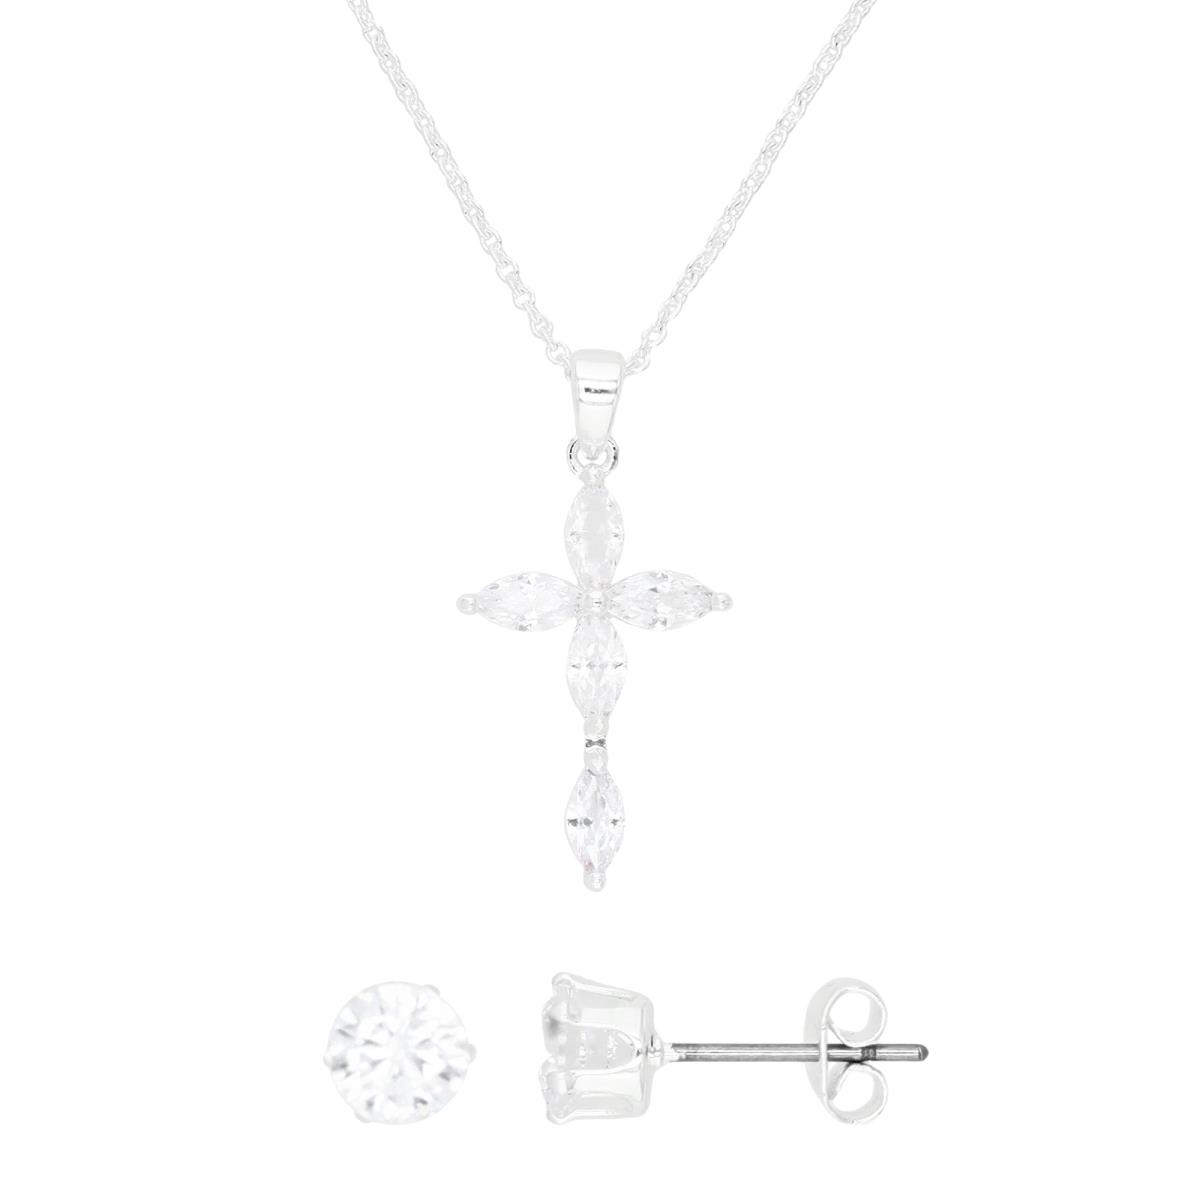 Platinum Plated Brass Silver Plated & White CZ MA Ct. Cross 16+2" Necklace and 5MM RD Ct. Stud Earrings Set